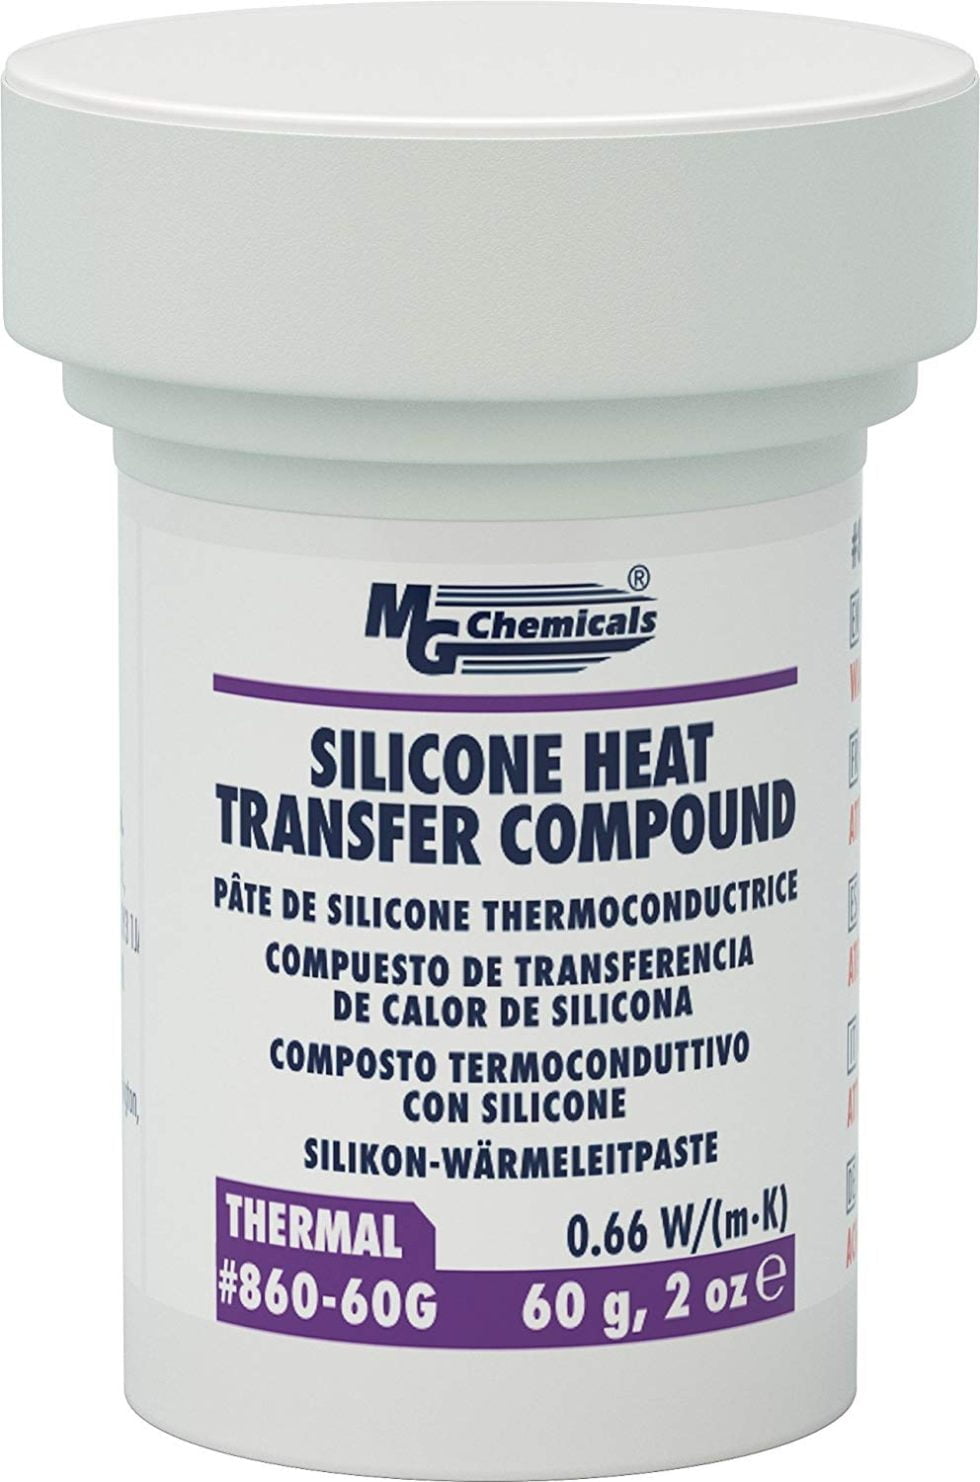 MG Chemical | Silicone Heat Transfer Compound